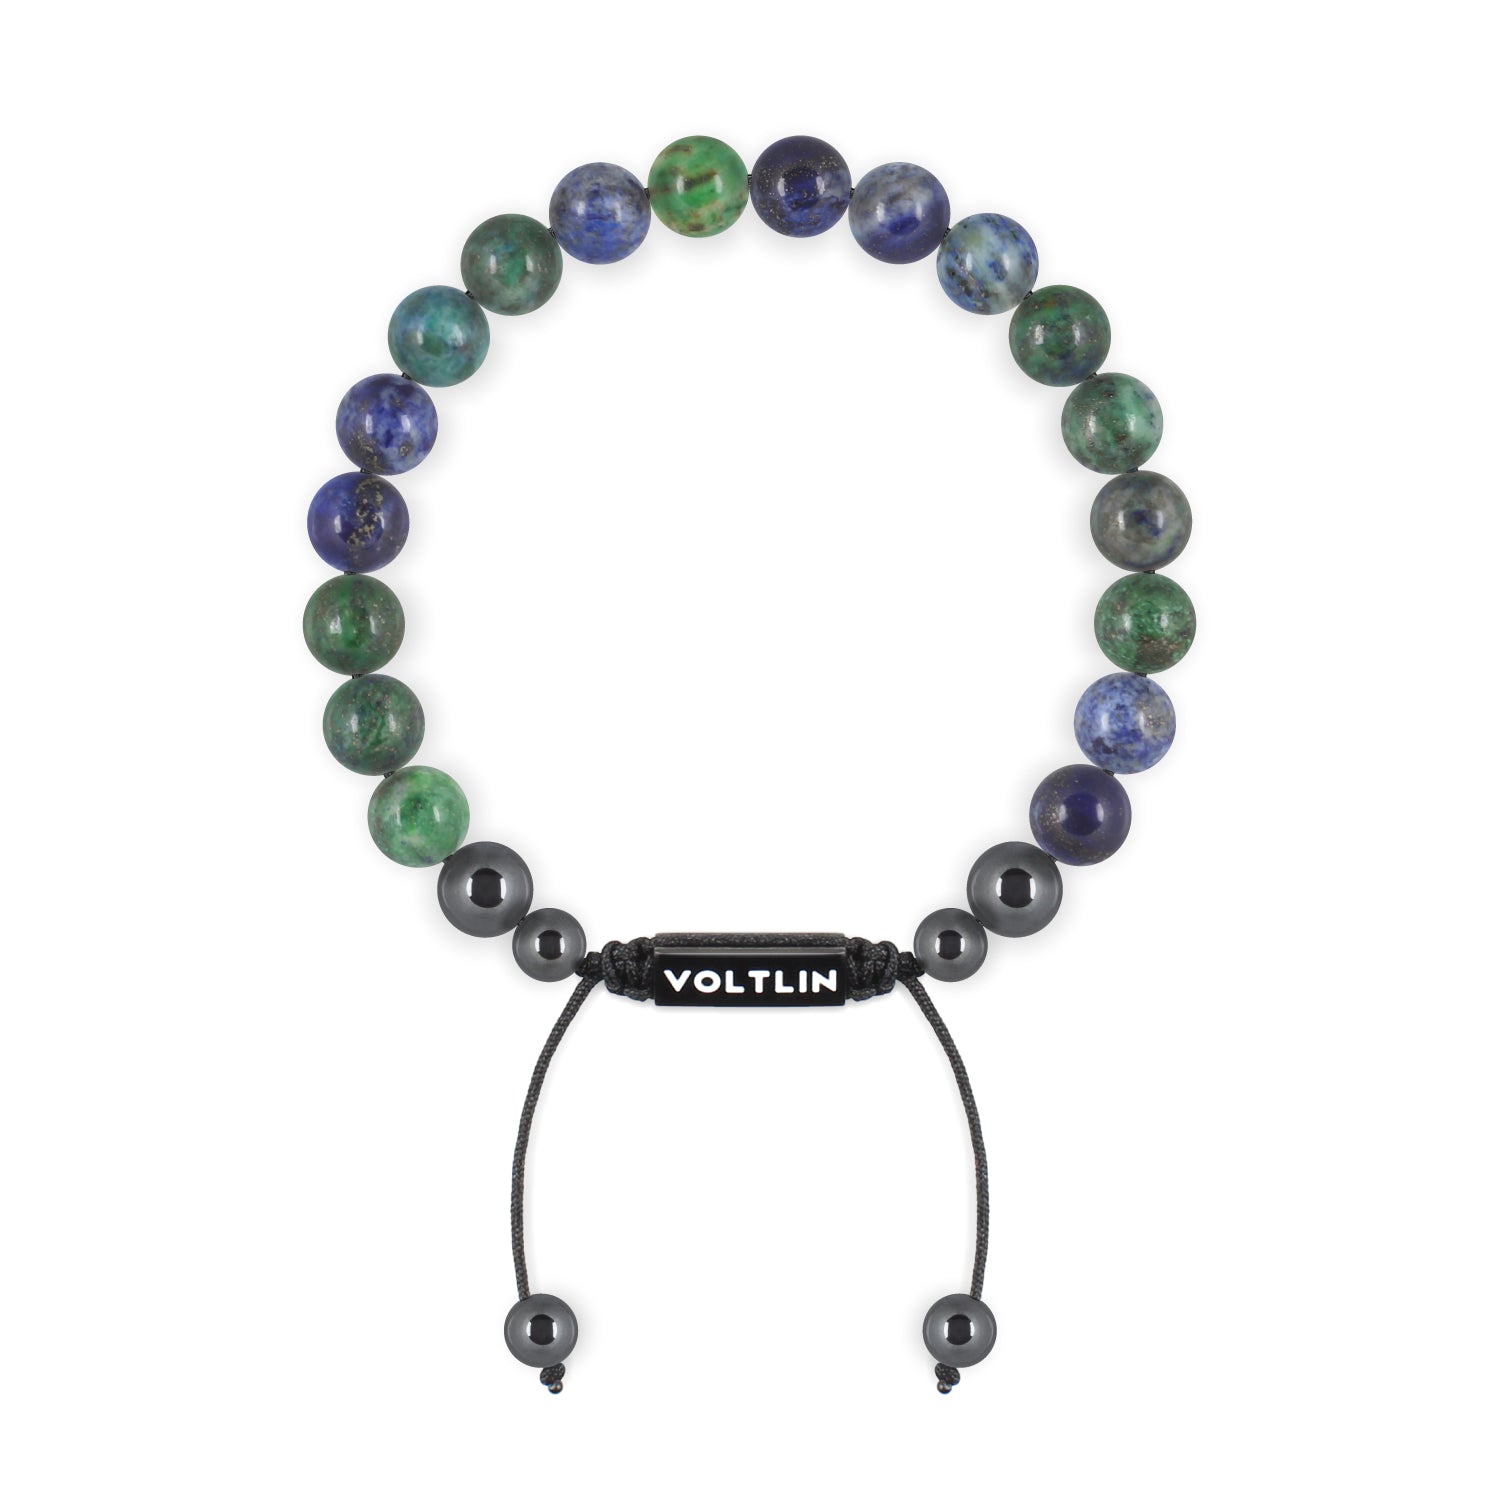 Front view of an 8mm Azurite crystal beaded shamballa bracelet with black stainless steel logo bead made by Voltlin